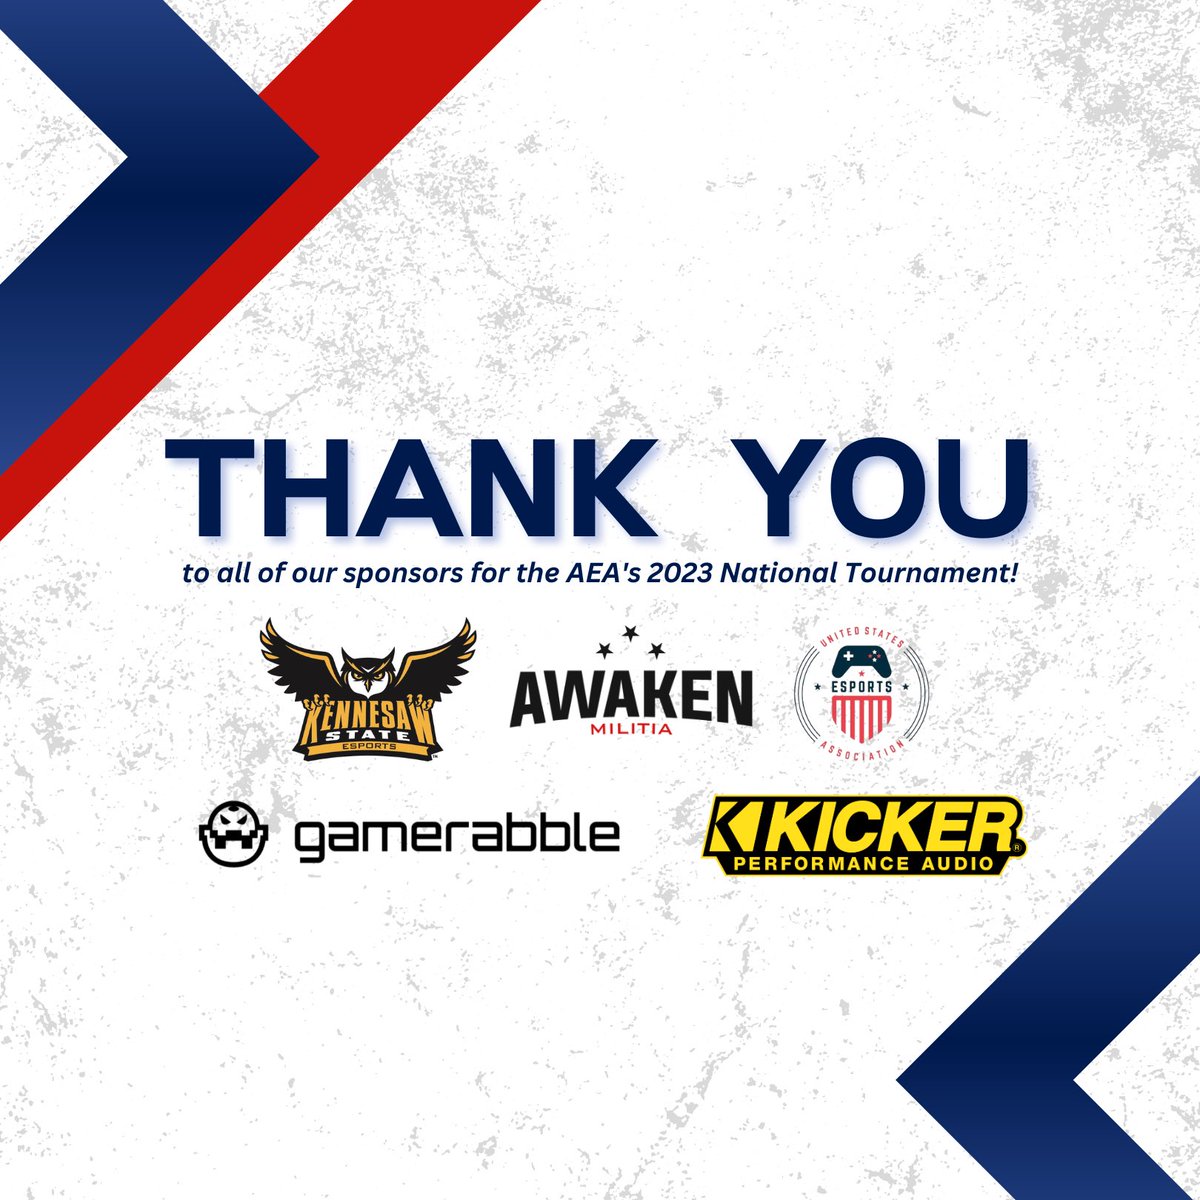 We want to give a huge THANK YOU to all the sponsors for the AEA's 2023 National Tournament: @KICKERaudio, @gamerabble, @KennesawEsports, @AwakenMilitia, and the @official_usea. 

These organizations help to support our mission, and we couldn't do it without them!